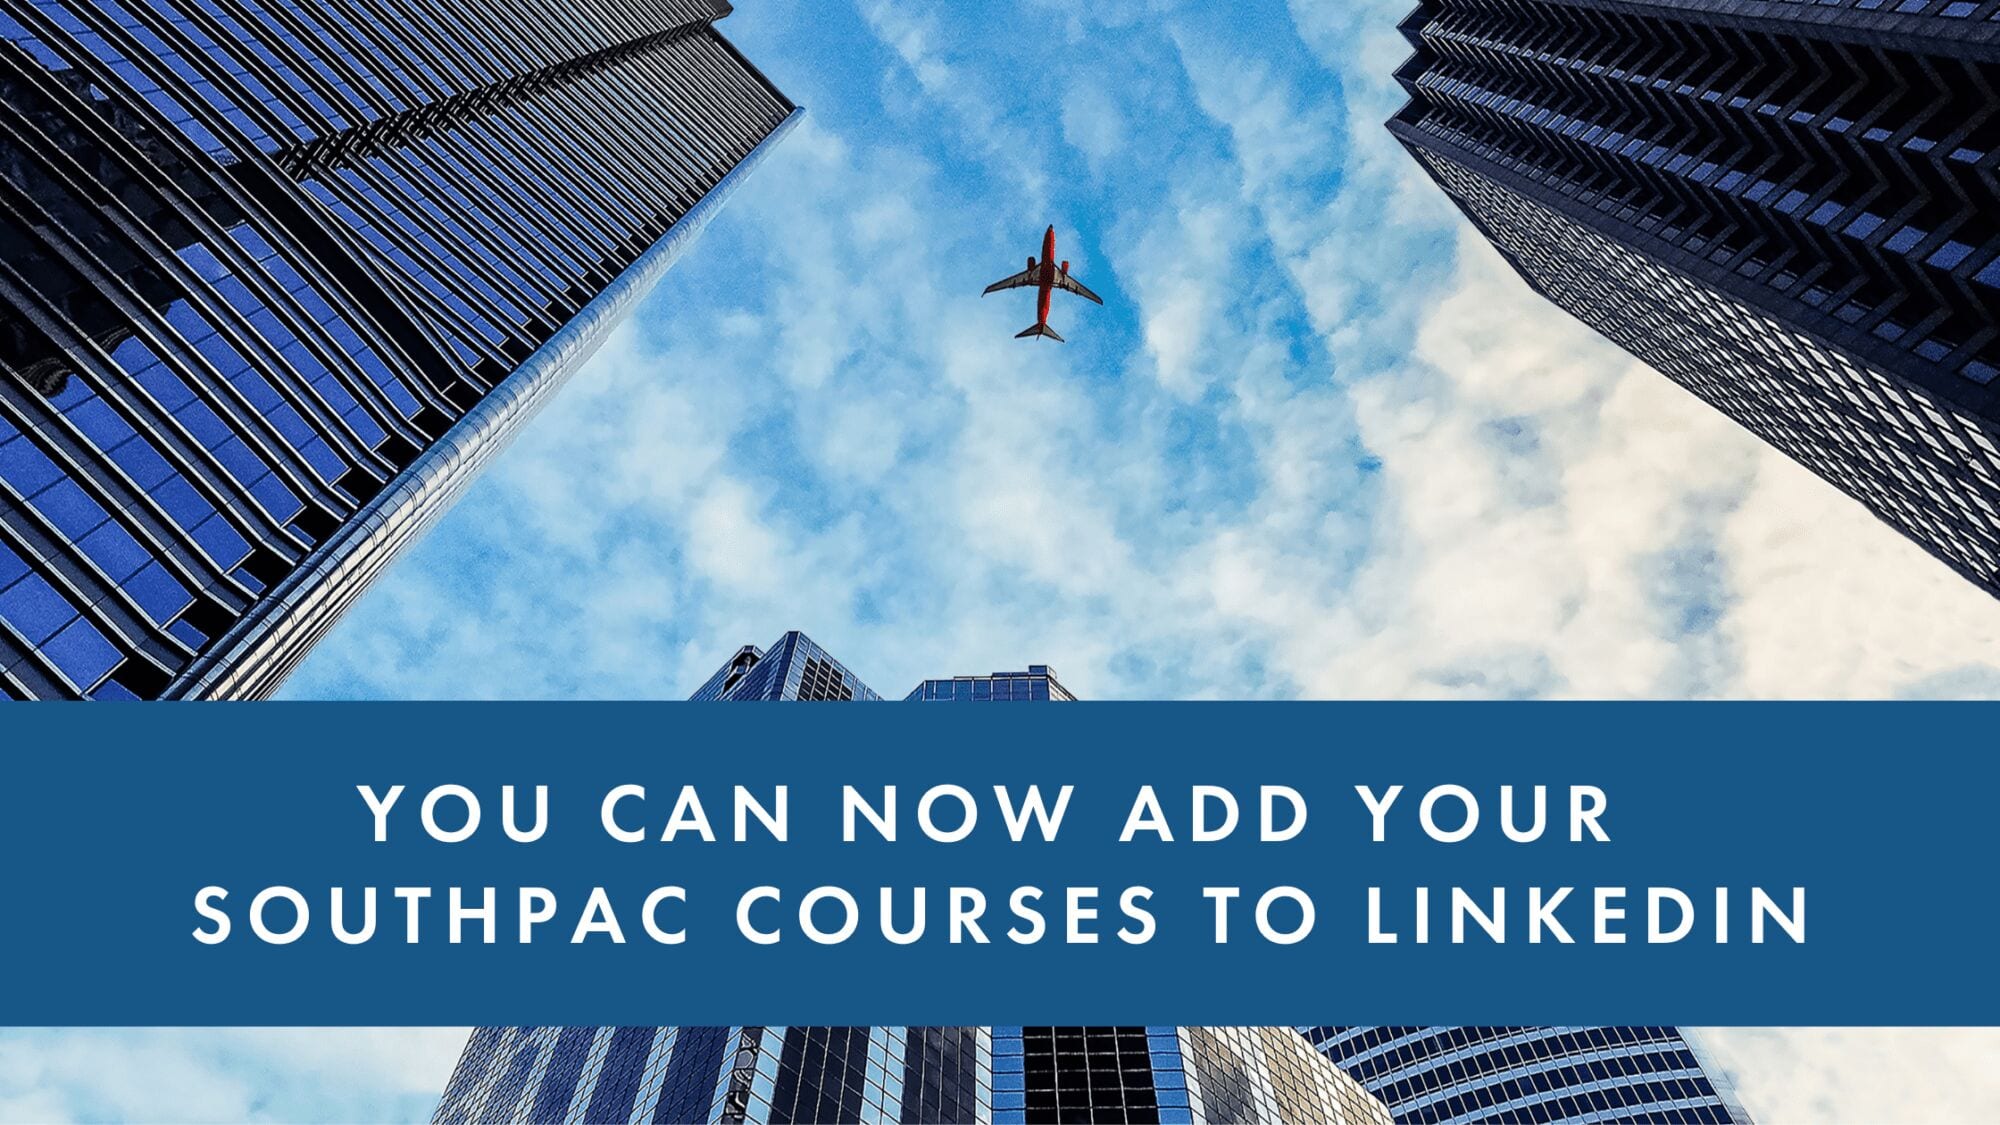 If you've completed a Southpac course or Diploma at any time, you can now add your qualifications to the Education section of your LinkedIn profile.